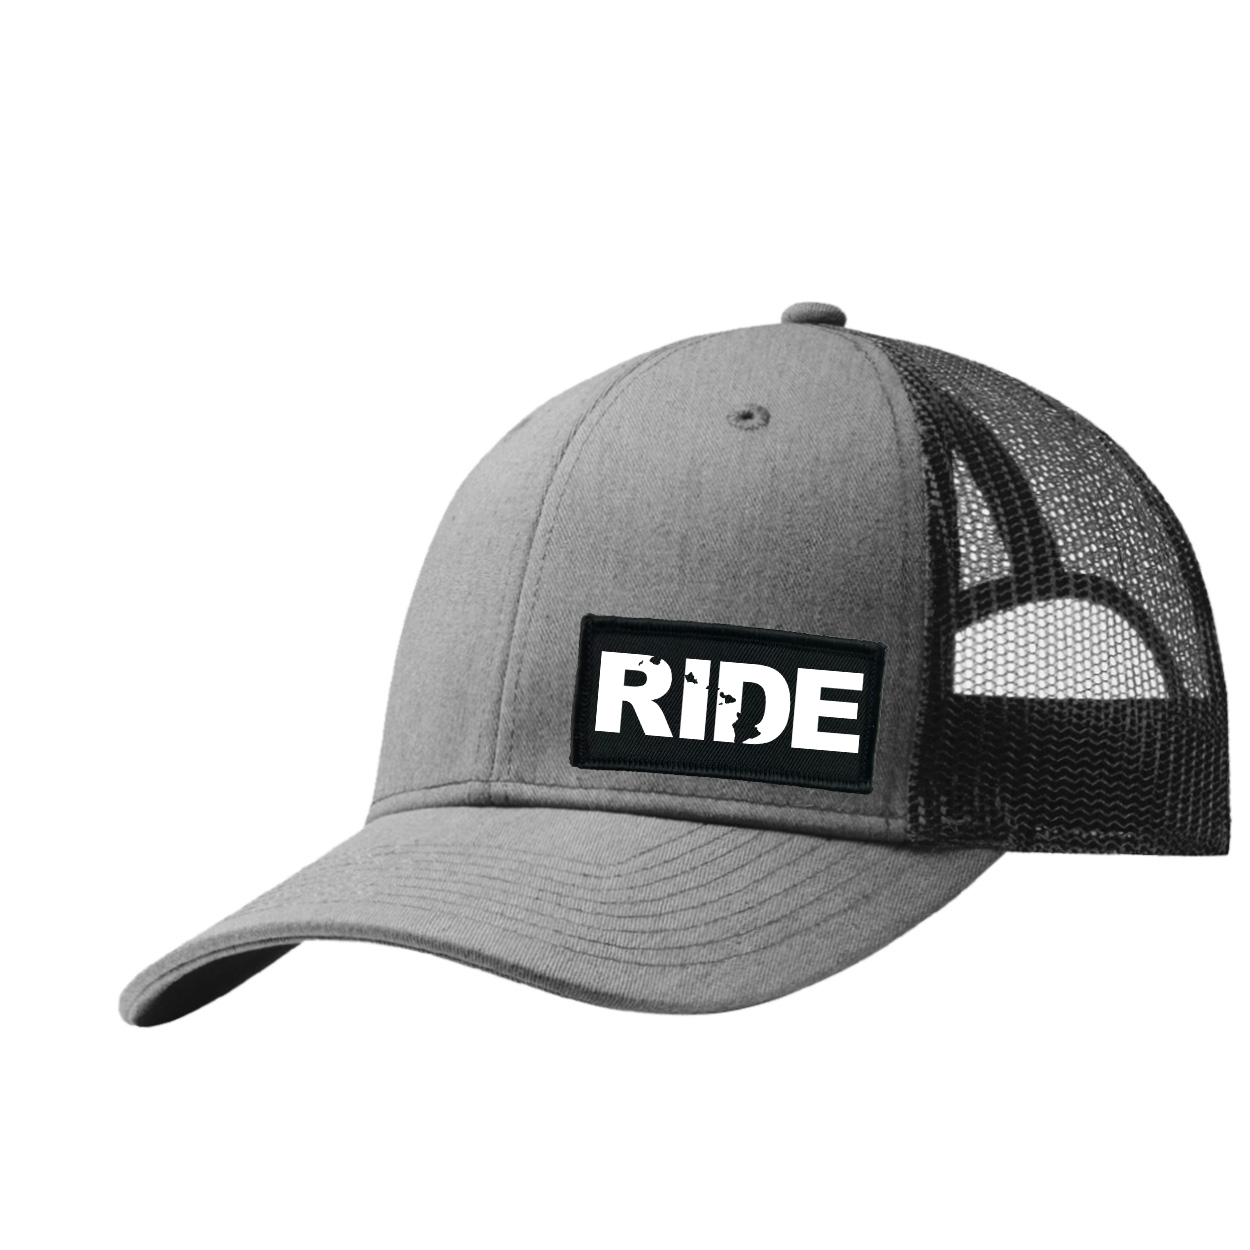 Ride Hawaii Night Out Woven Patch Snapback Trucker Hat Heather Gray/Black (White Logo)